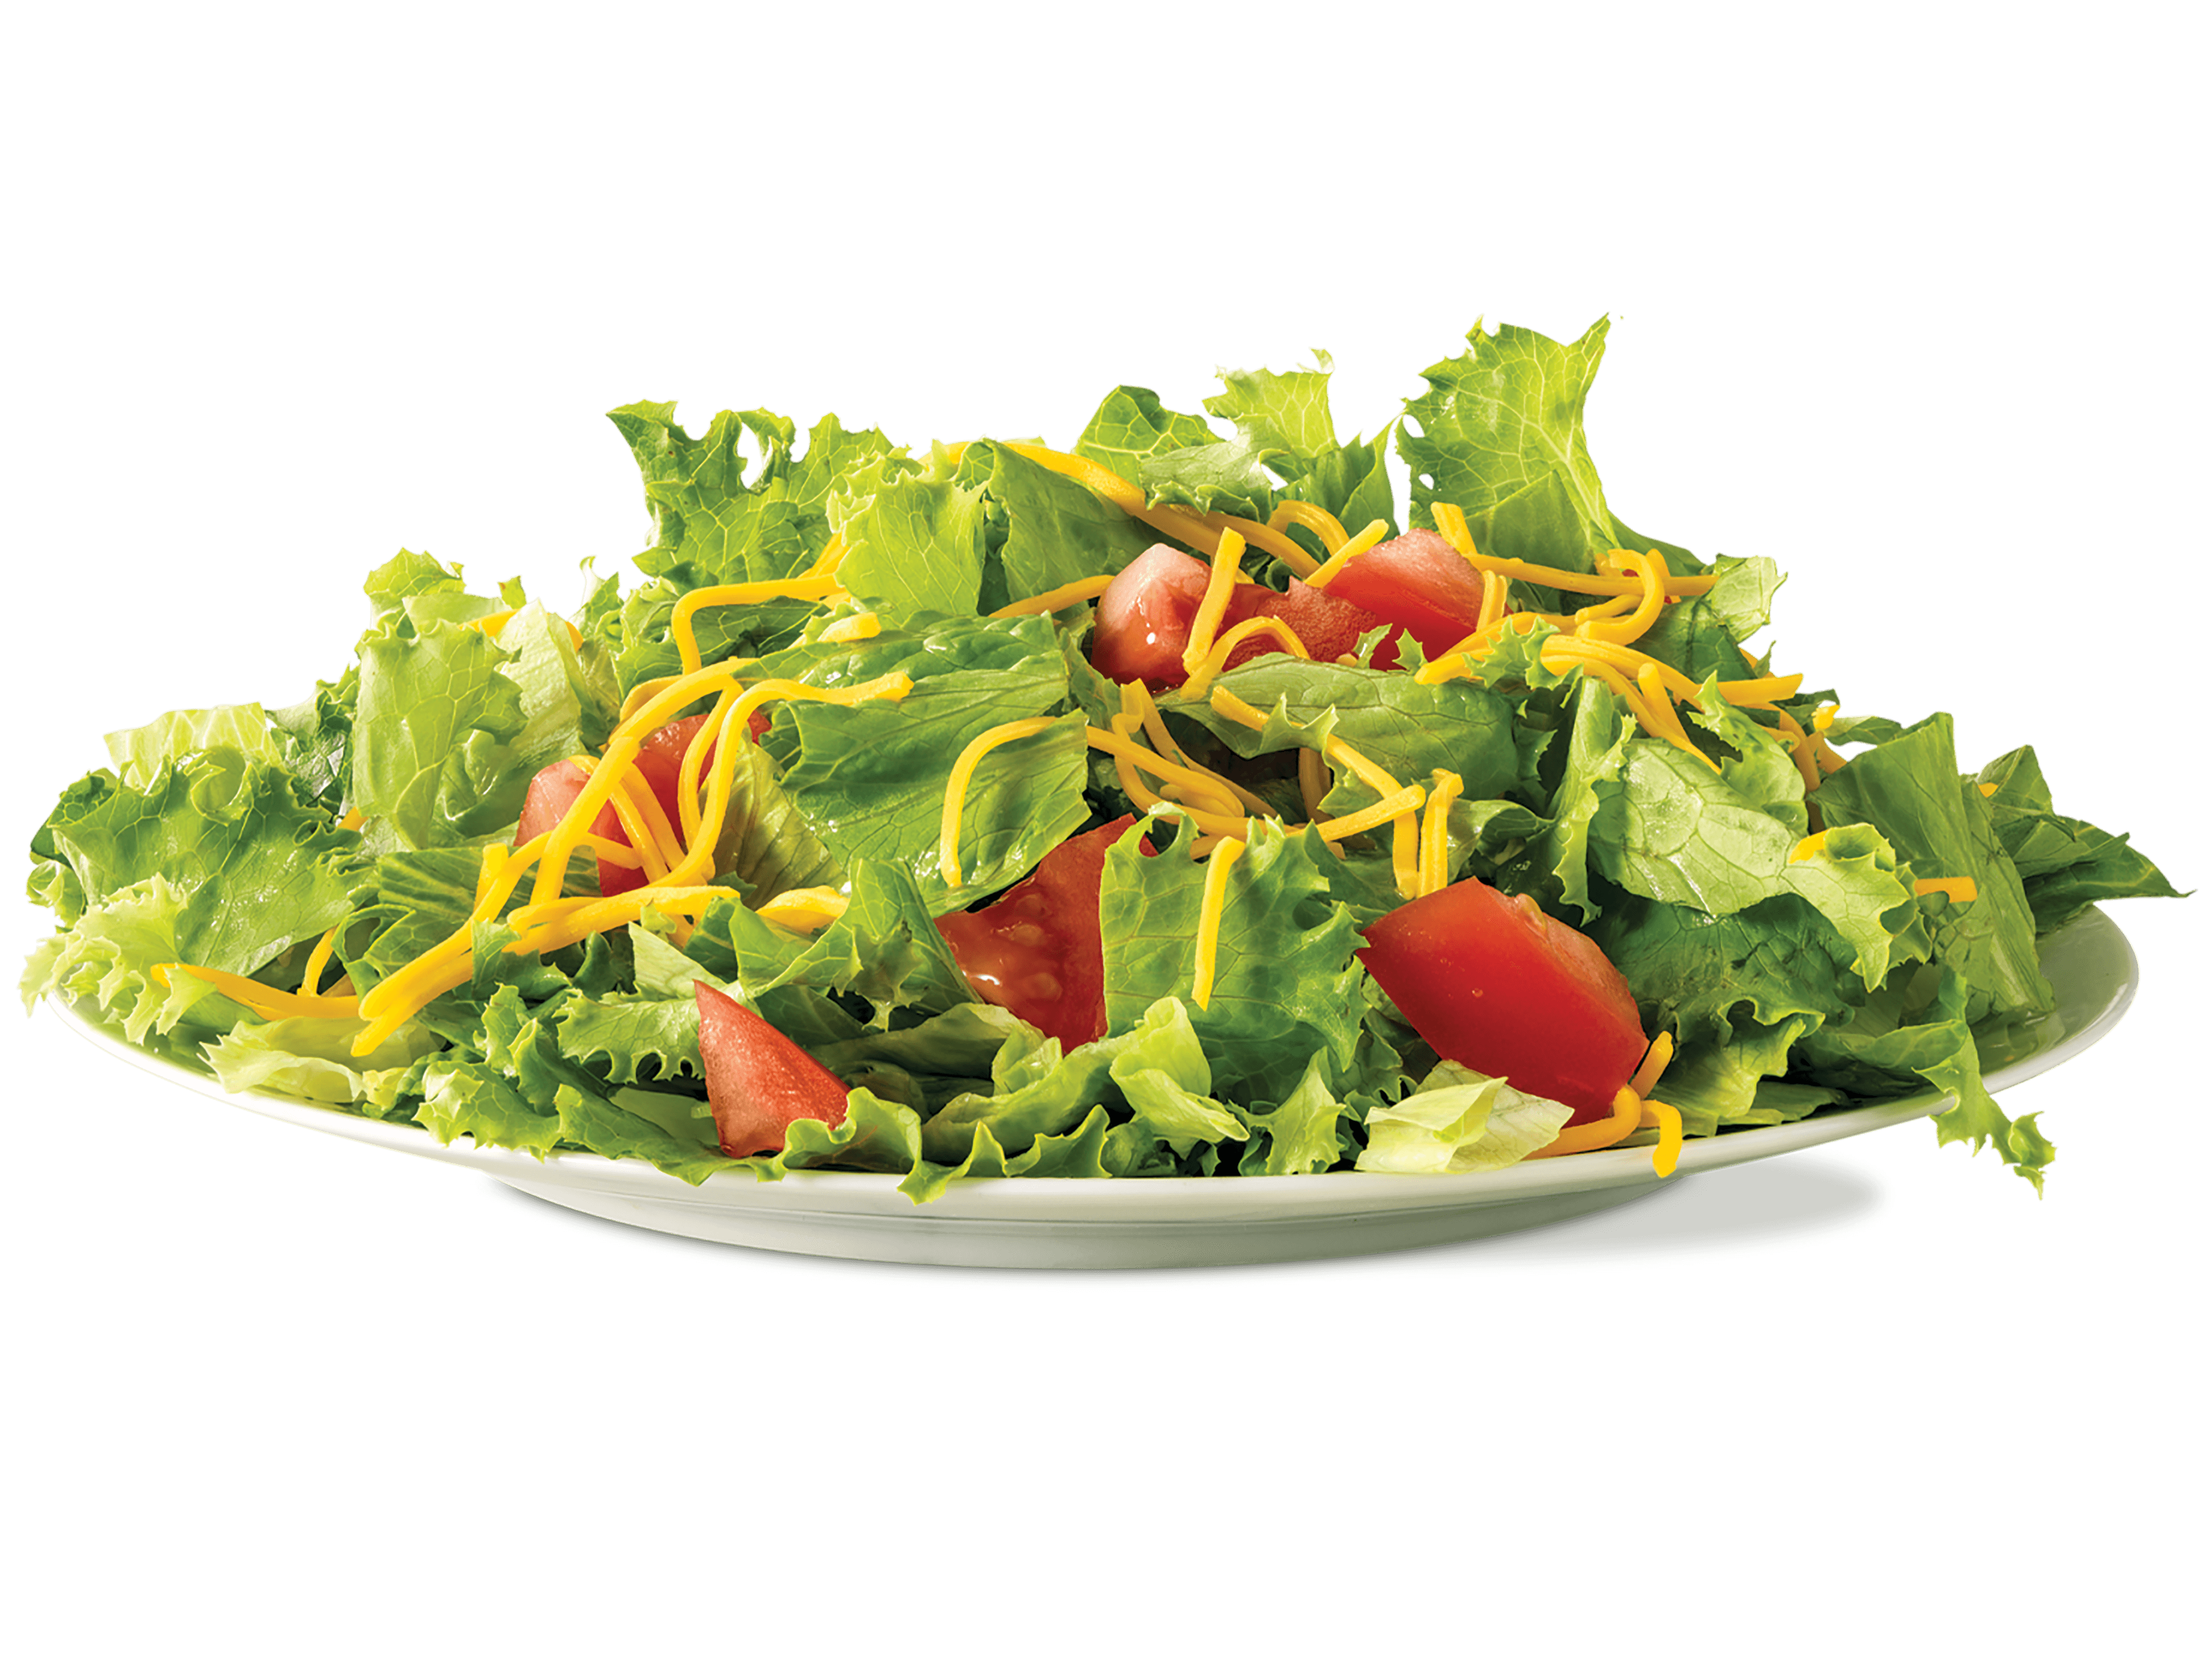 Calories in Arby's Side Salad